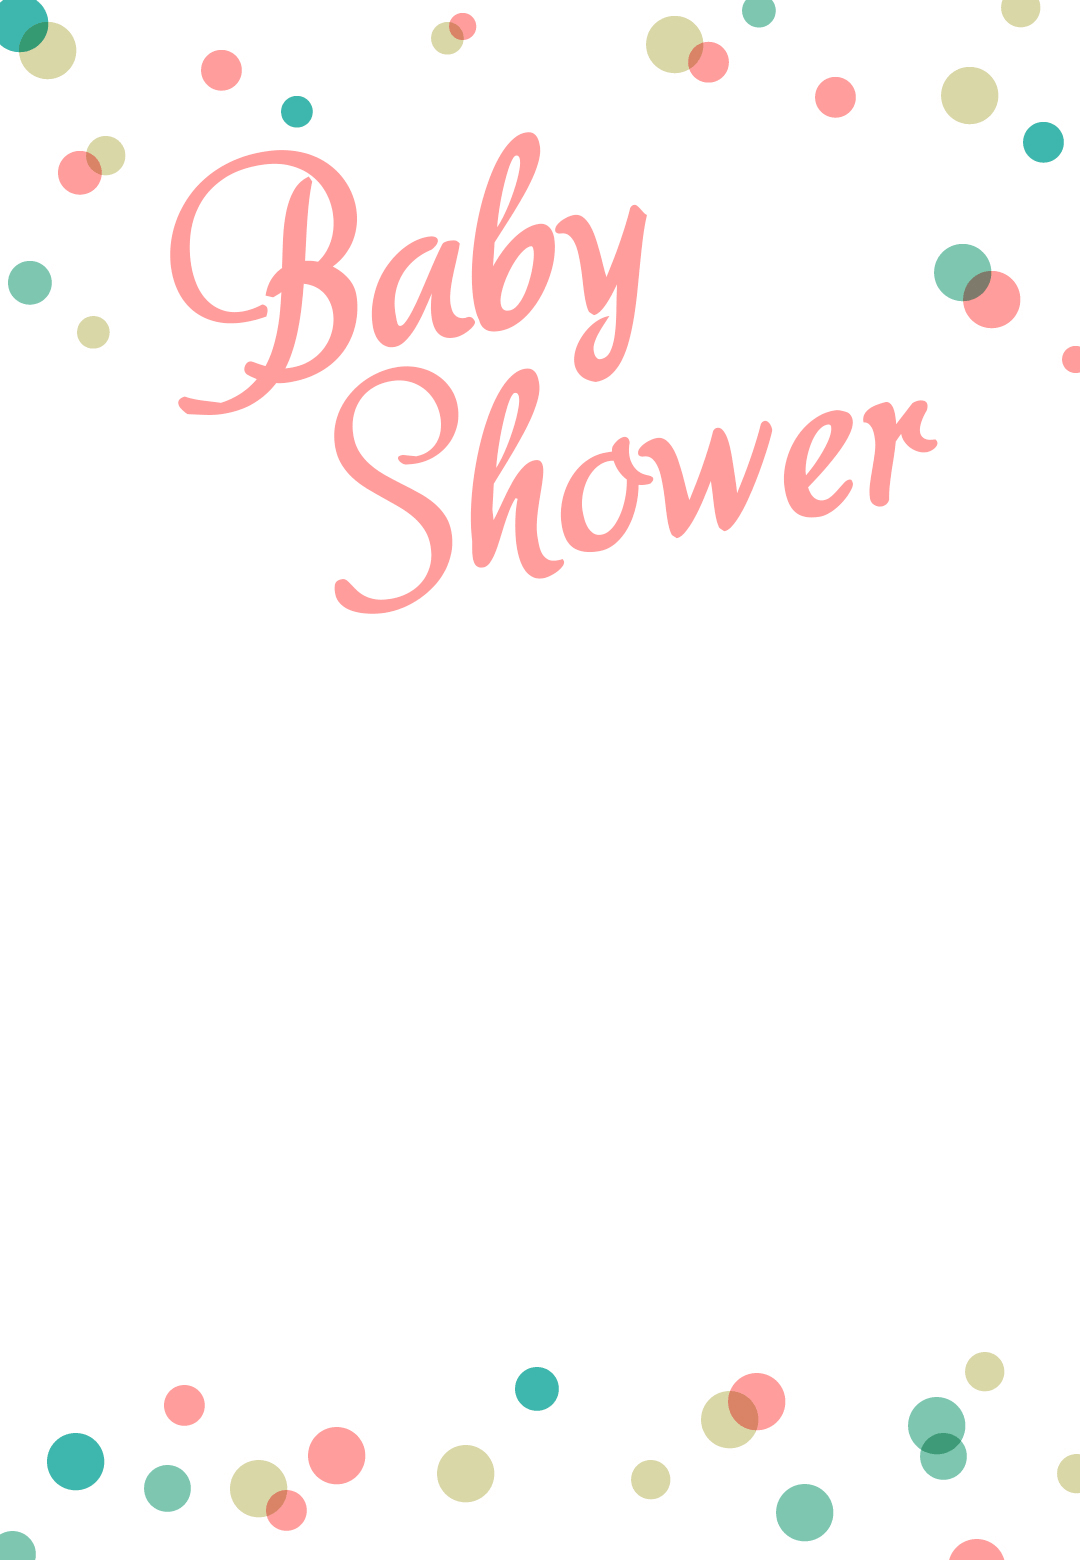 Full Size of Baby Shower:sturdy Baby Shower Invitation Template Image Concepts Baby Shower Invitation Template Baby Shower Bingo Baby Shower Accessories Arreglos Para Baby Shower Baby Shower Clip Art Dancing Dots Borders Free Printable Baby Shower Invitation